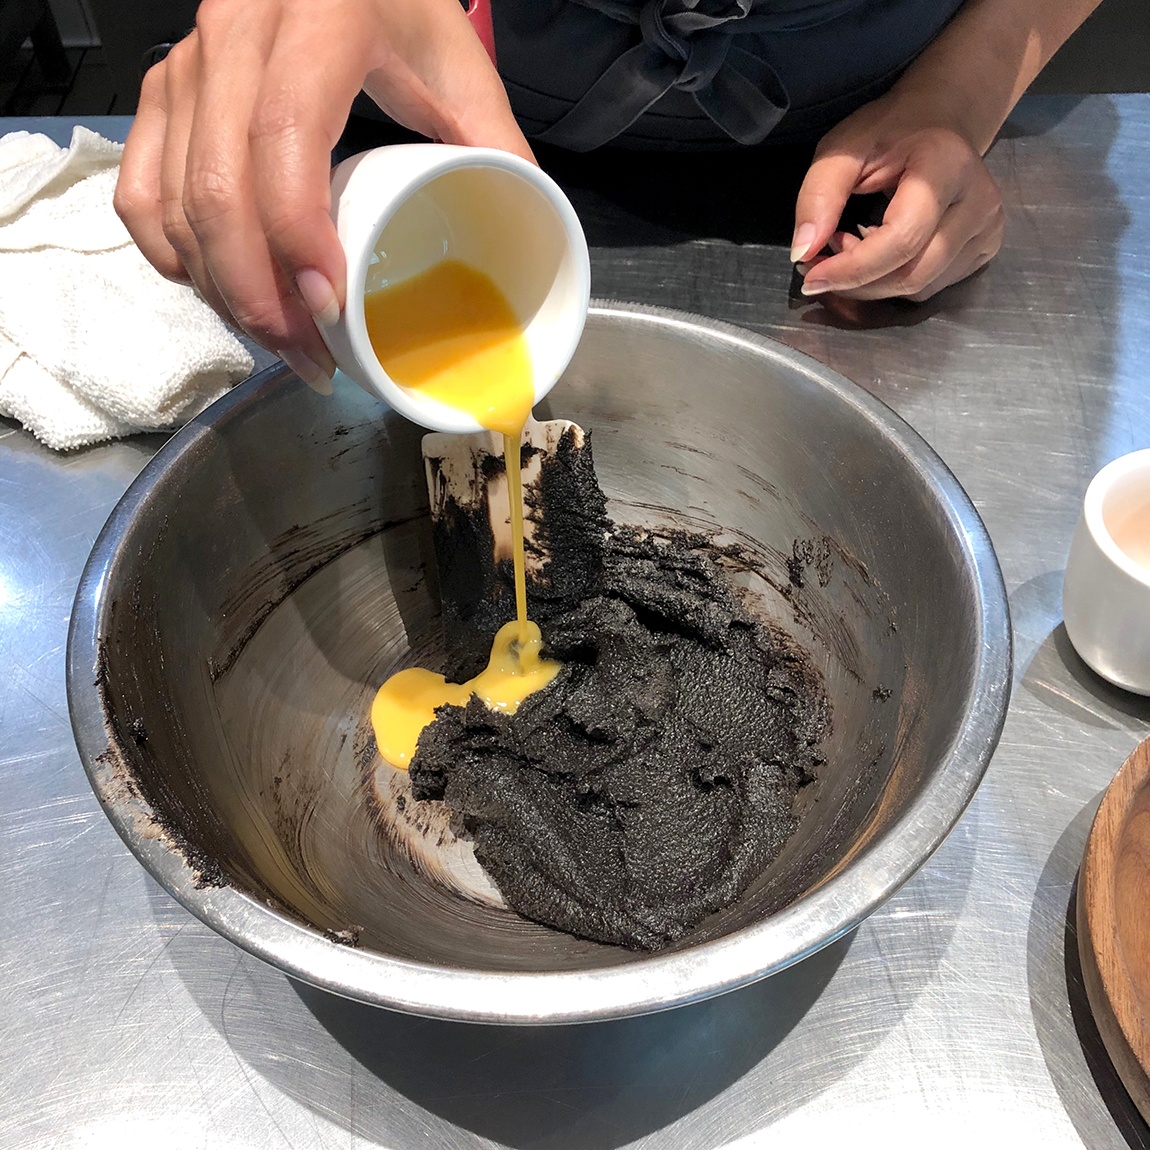 Summer Wright pours an egg yolk into a metal mixing bowl with a chocolate substance.